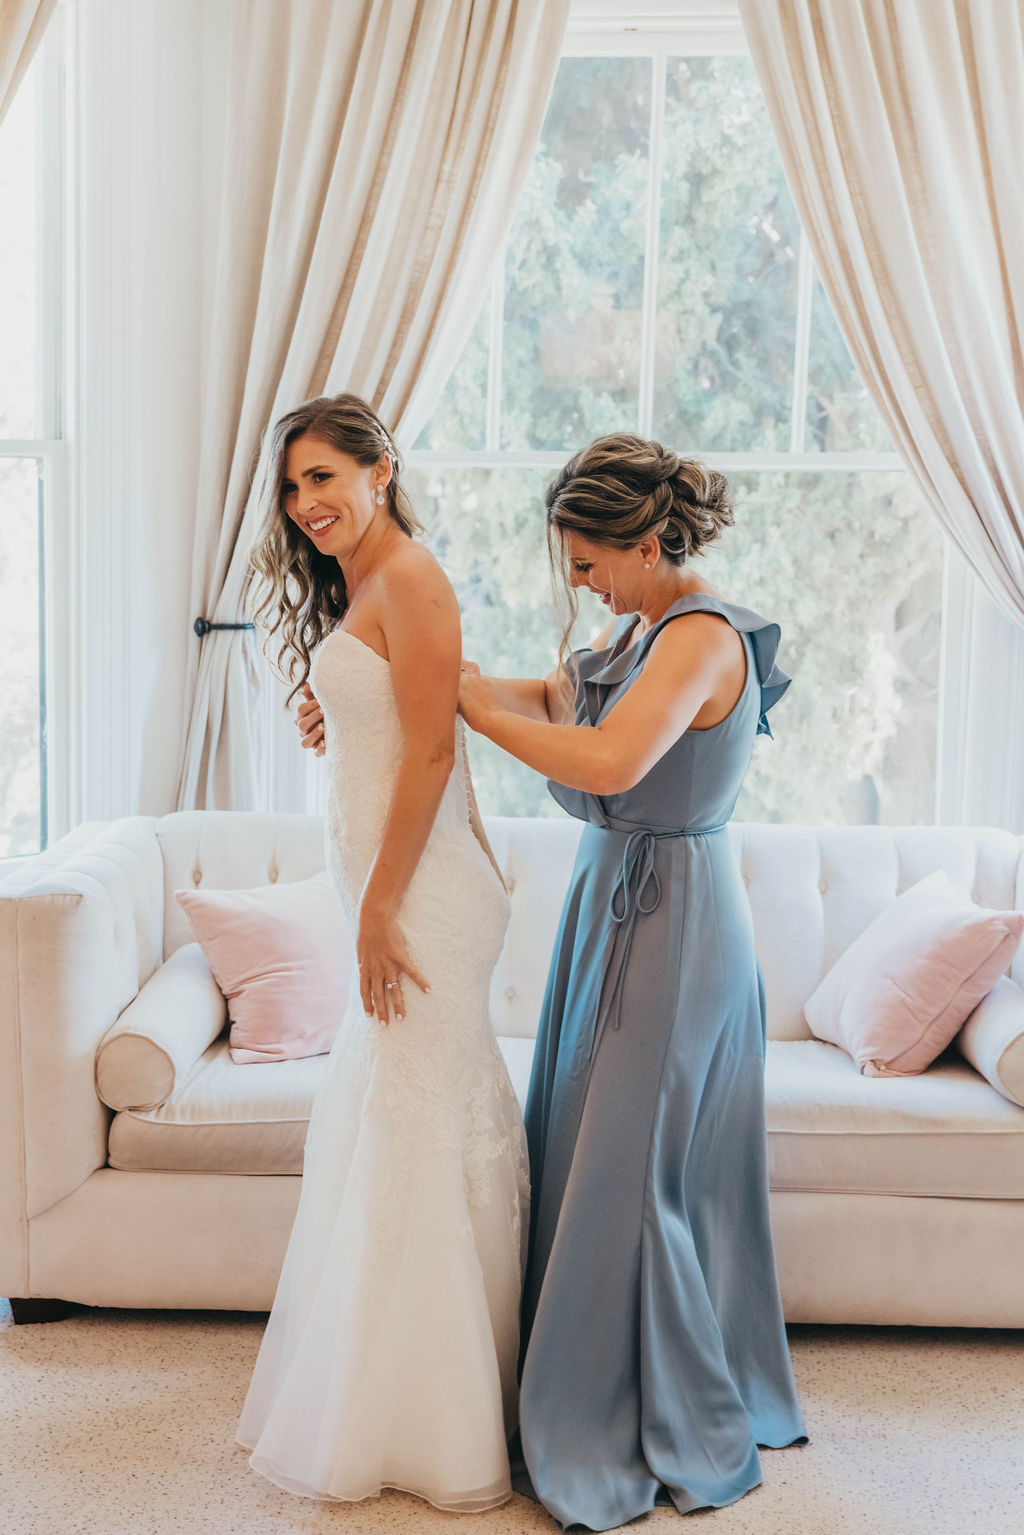 A woman in a blue dress adjusts the back of a bride's white gown in a bright room with large windows and elegant curtains at her Park Winters wedding